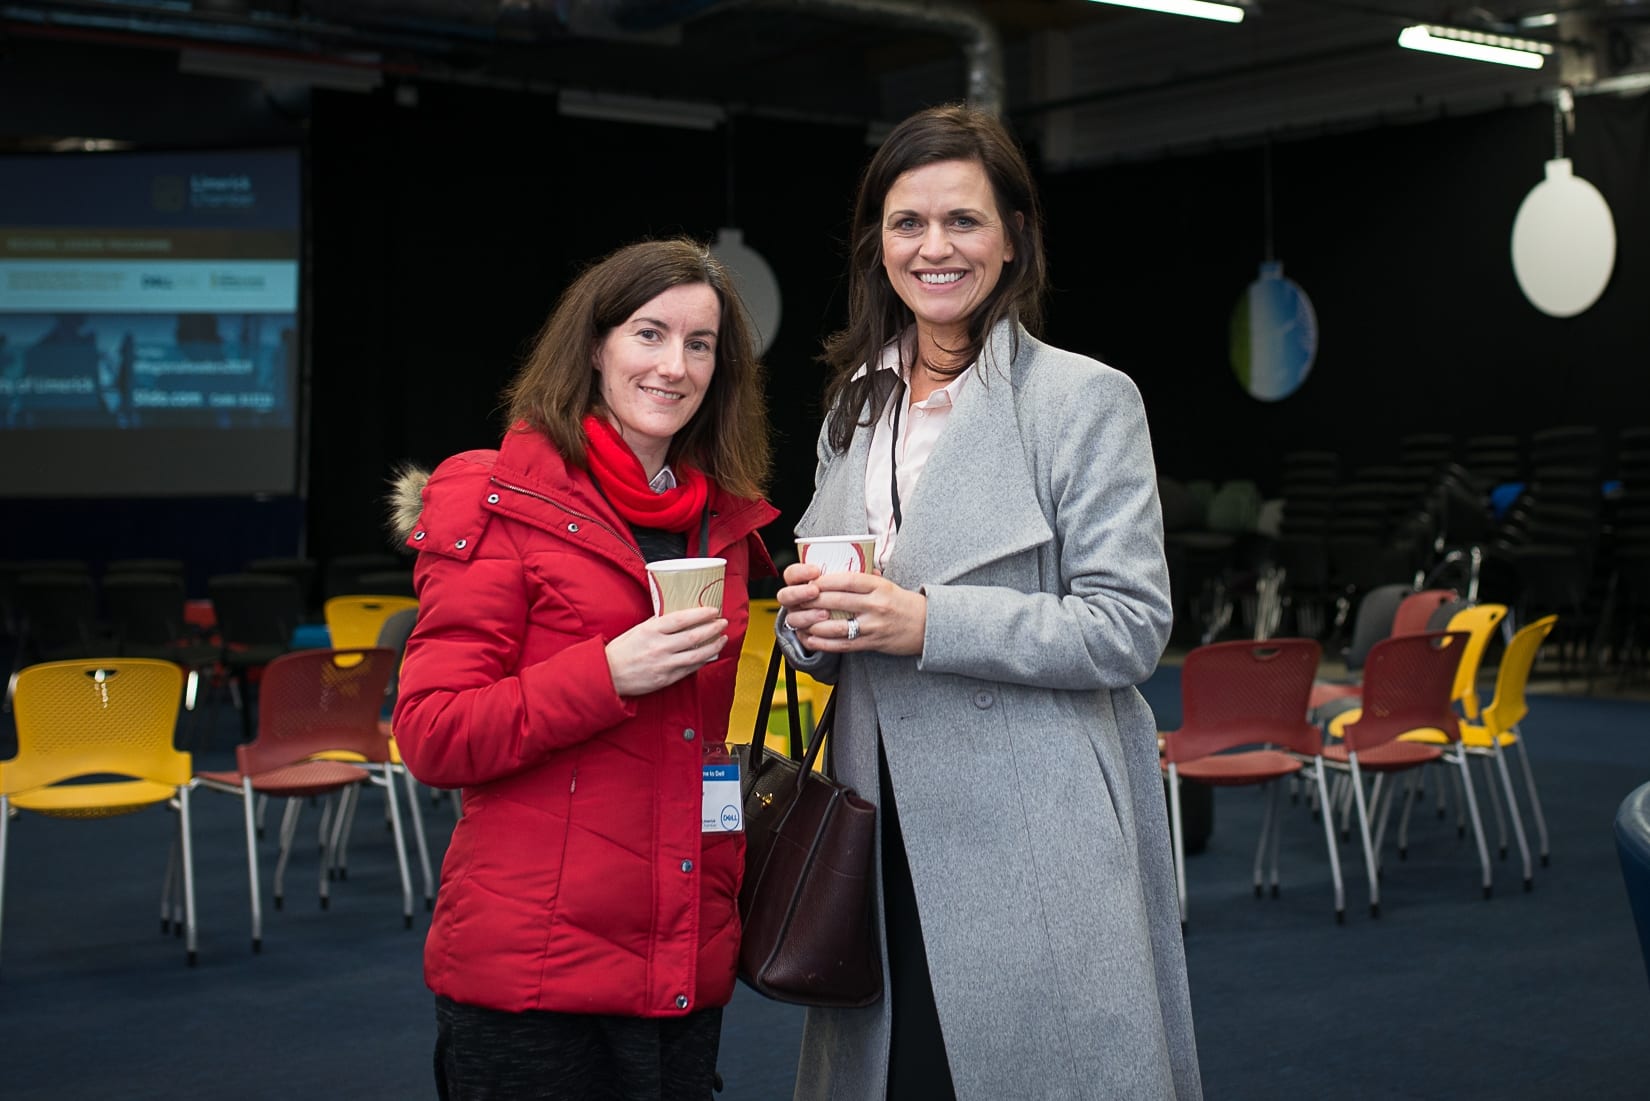 At the Limerick Chamber Regional Leaders programme in Dell, sponsored by Dell EMC, in association with Kemmy Business School UL, was From left to right: Meabh Shine  and Mairead Holland both from Analog Devices.